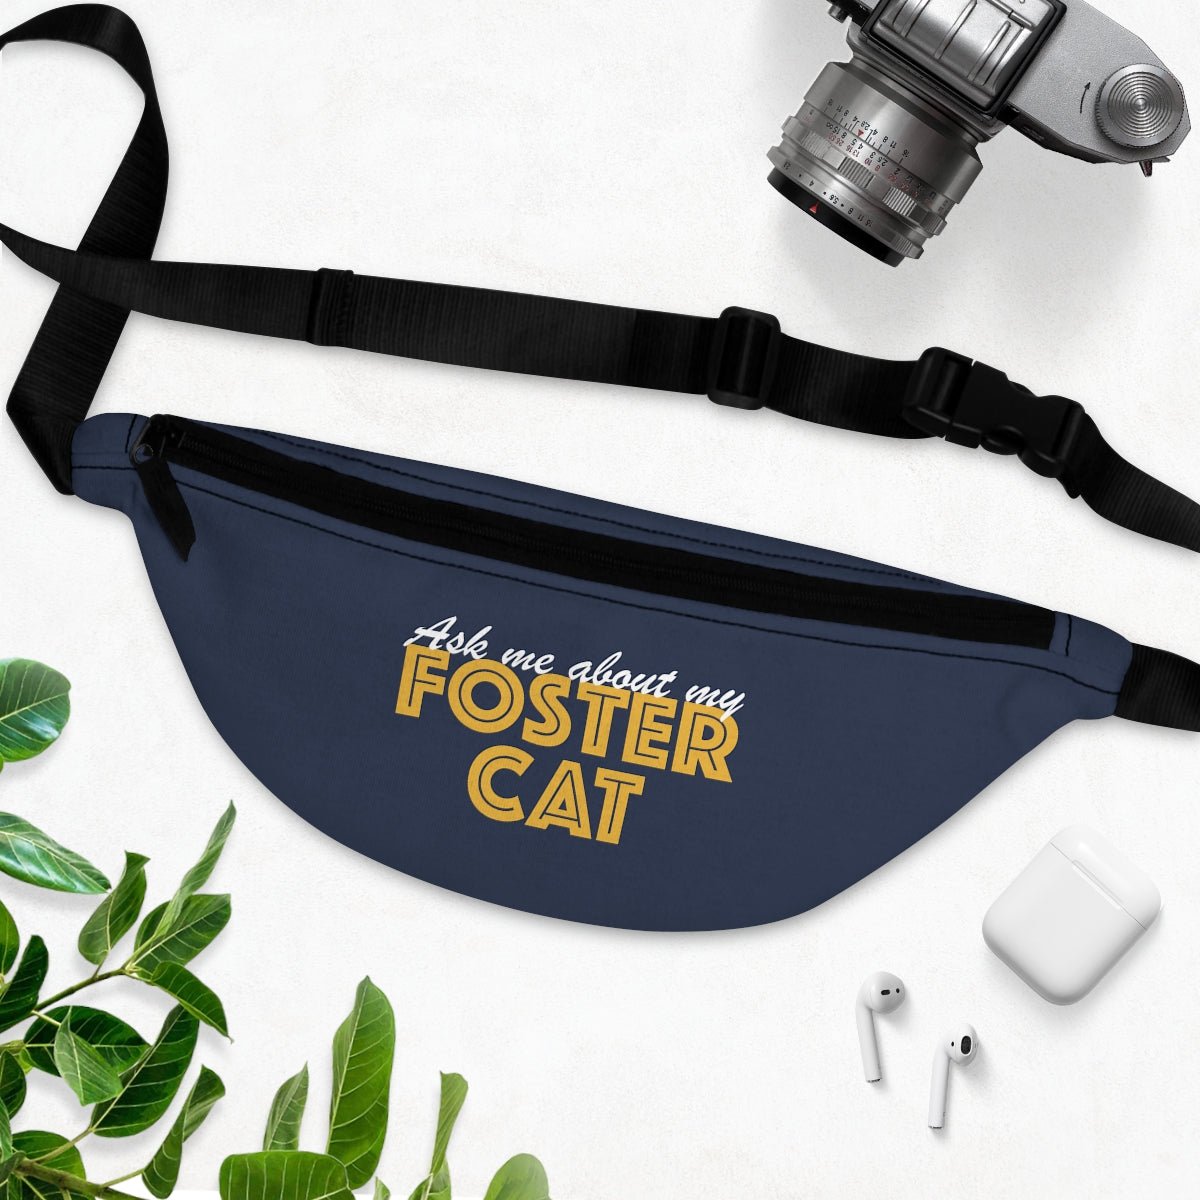 Ask Me About My Foster Cat | Fanny Pack - Detezi Designs-11286266457658903210